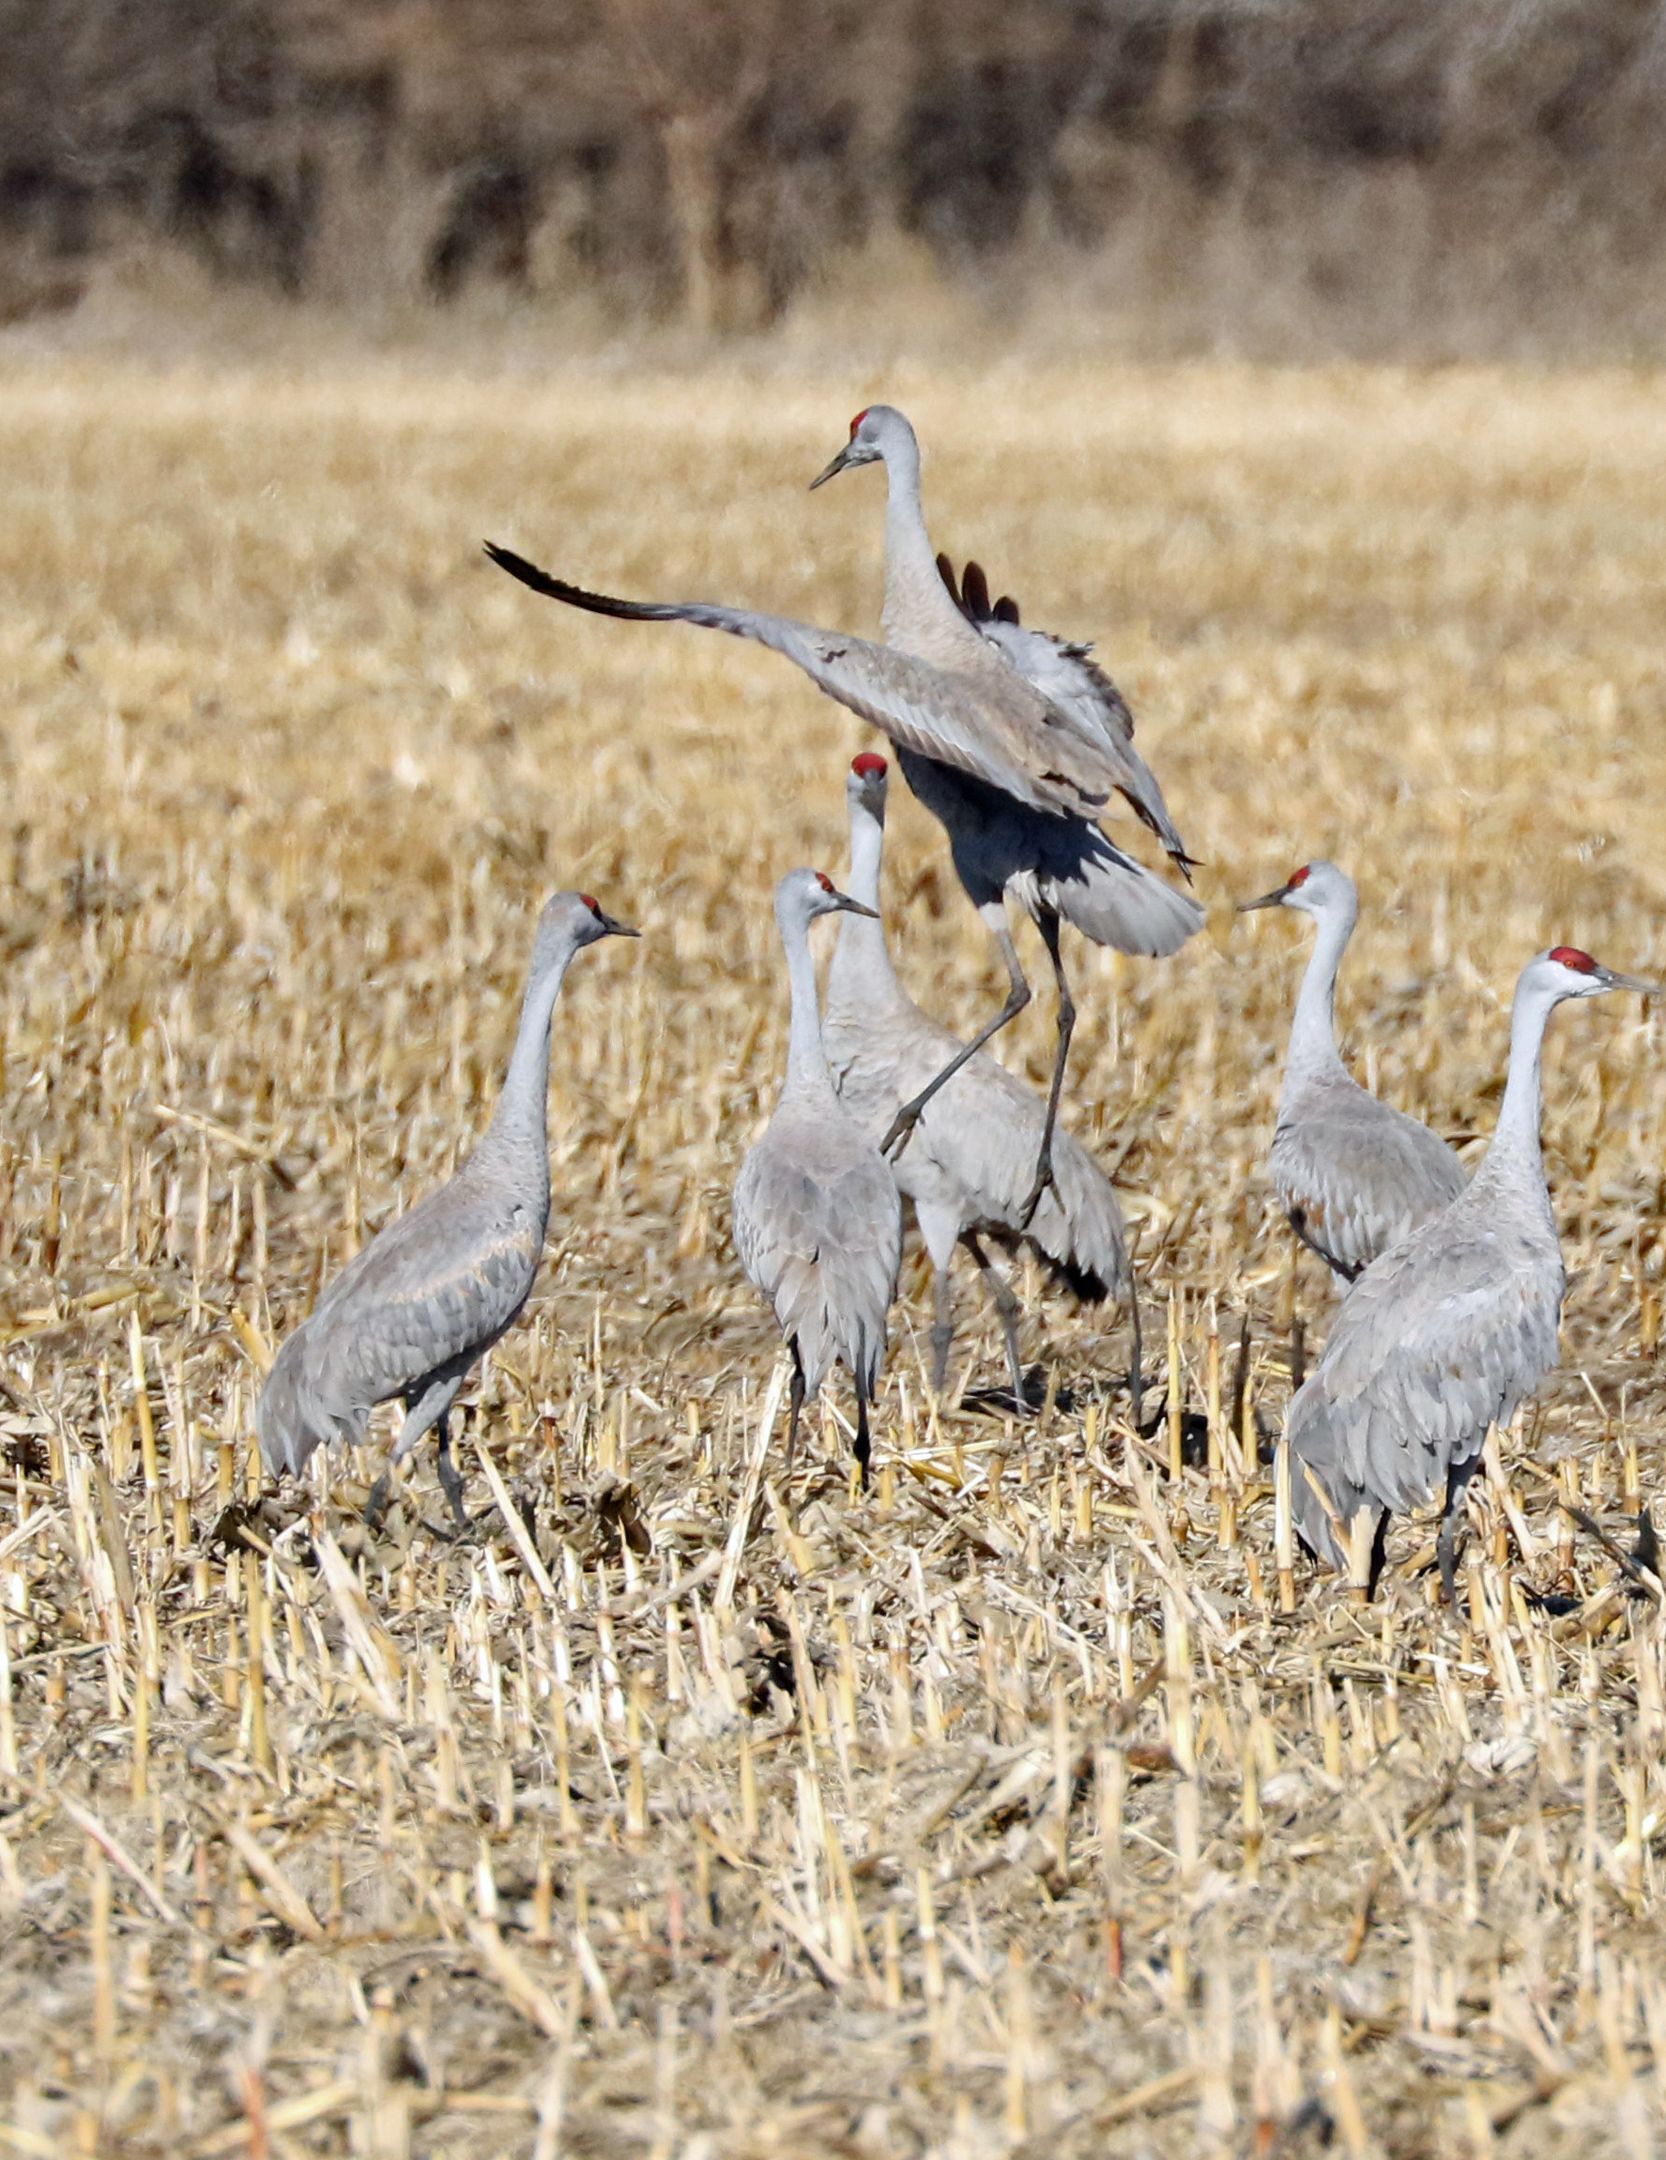 a sandhills crane landing in a group of five other cranes